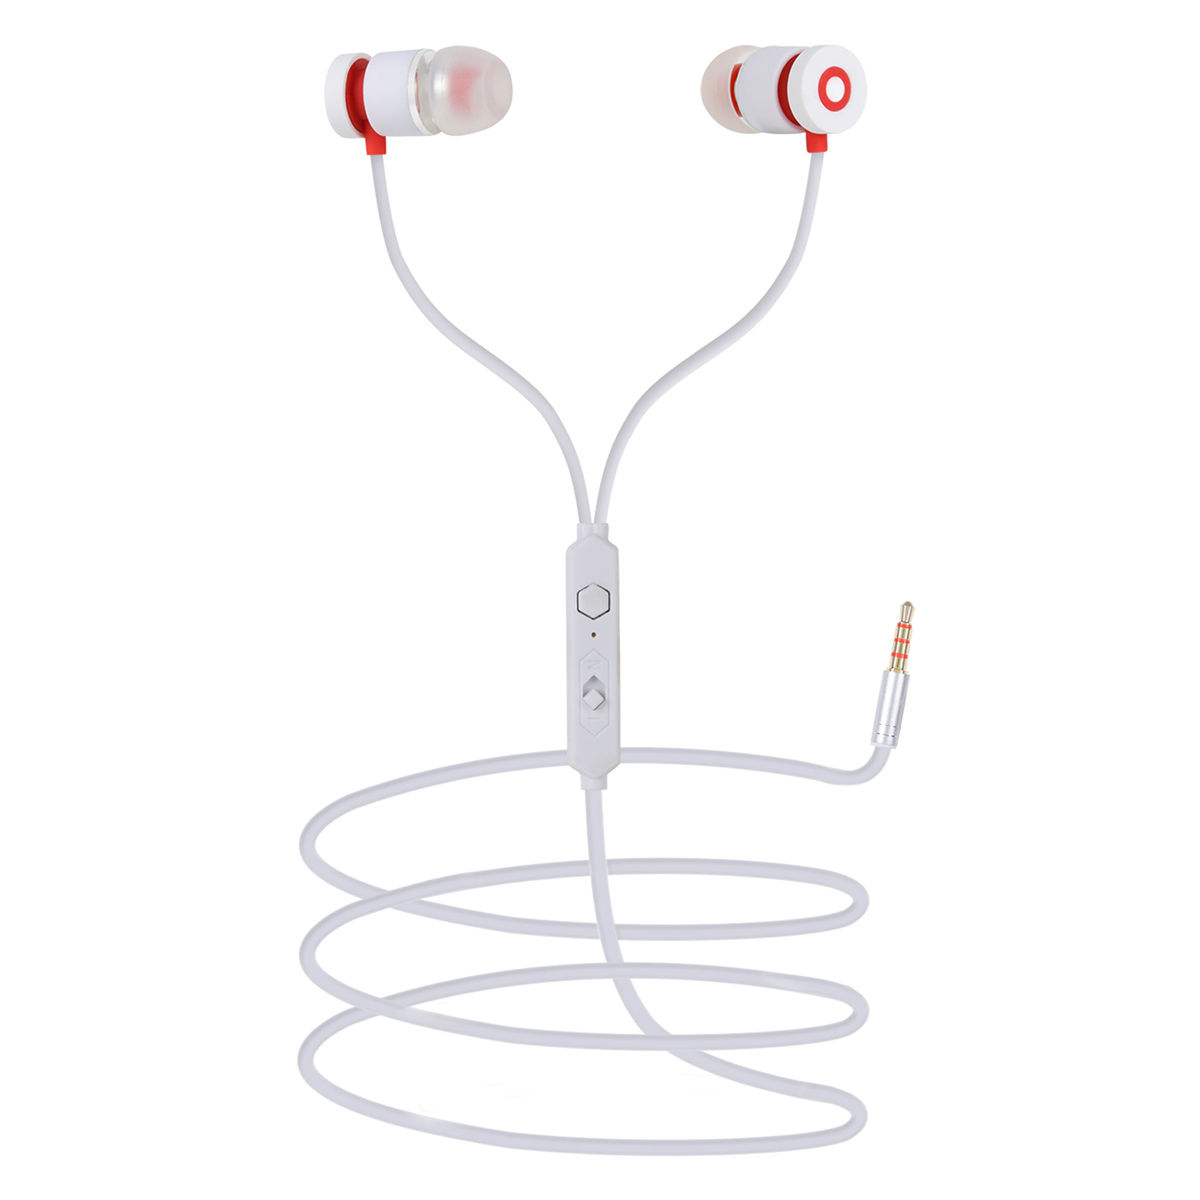 Swagme Bassboss IE004 in-Ear Wired Earphones with Mic (Red)